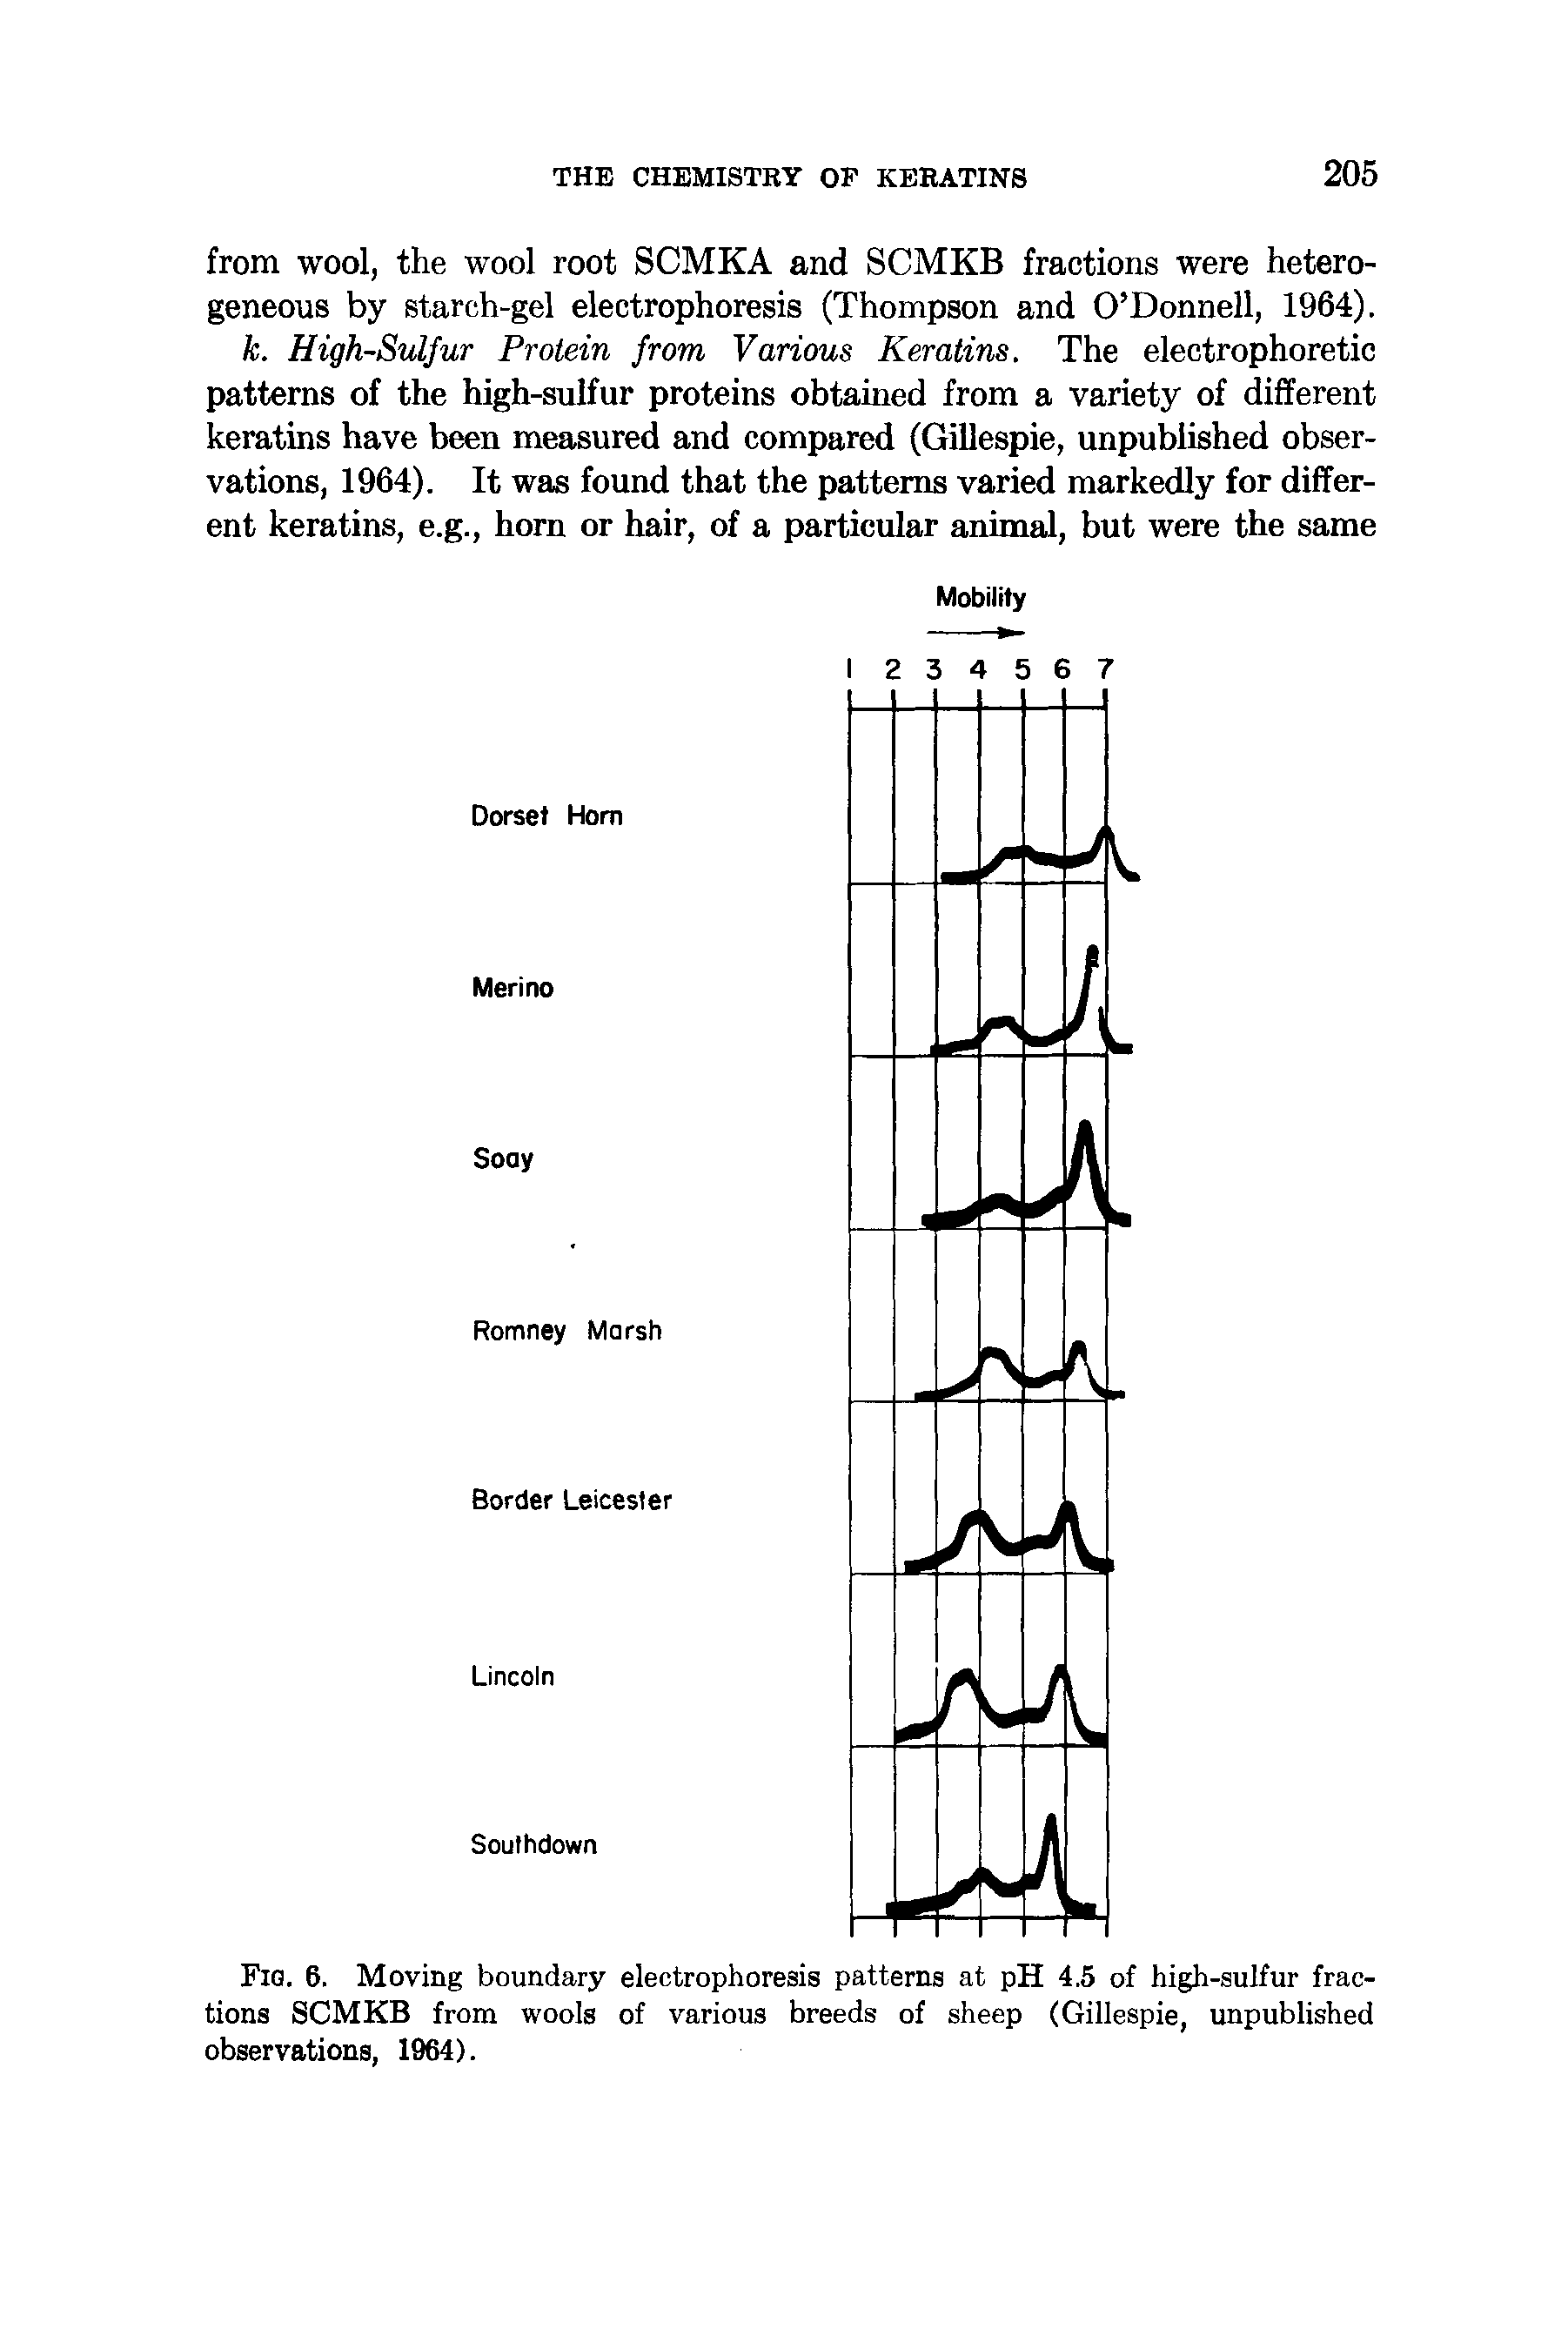 Fig. 6. Moving boundary electrophoresis patterns at pH 4.5 of high-sulfur fractions SCMKB from wools of various breeds of sheep (Gillespie, unpublished observations, 1964).